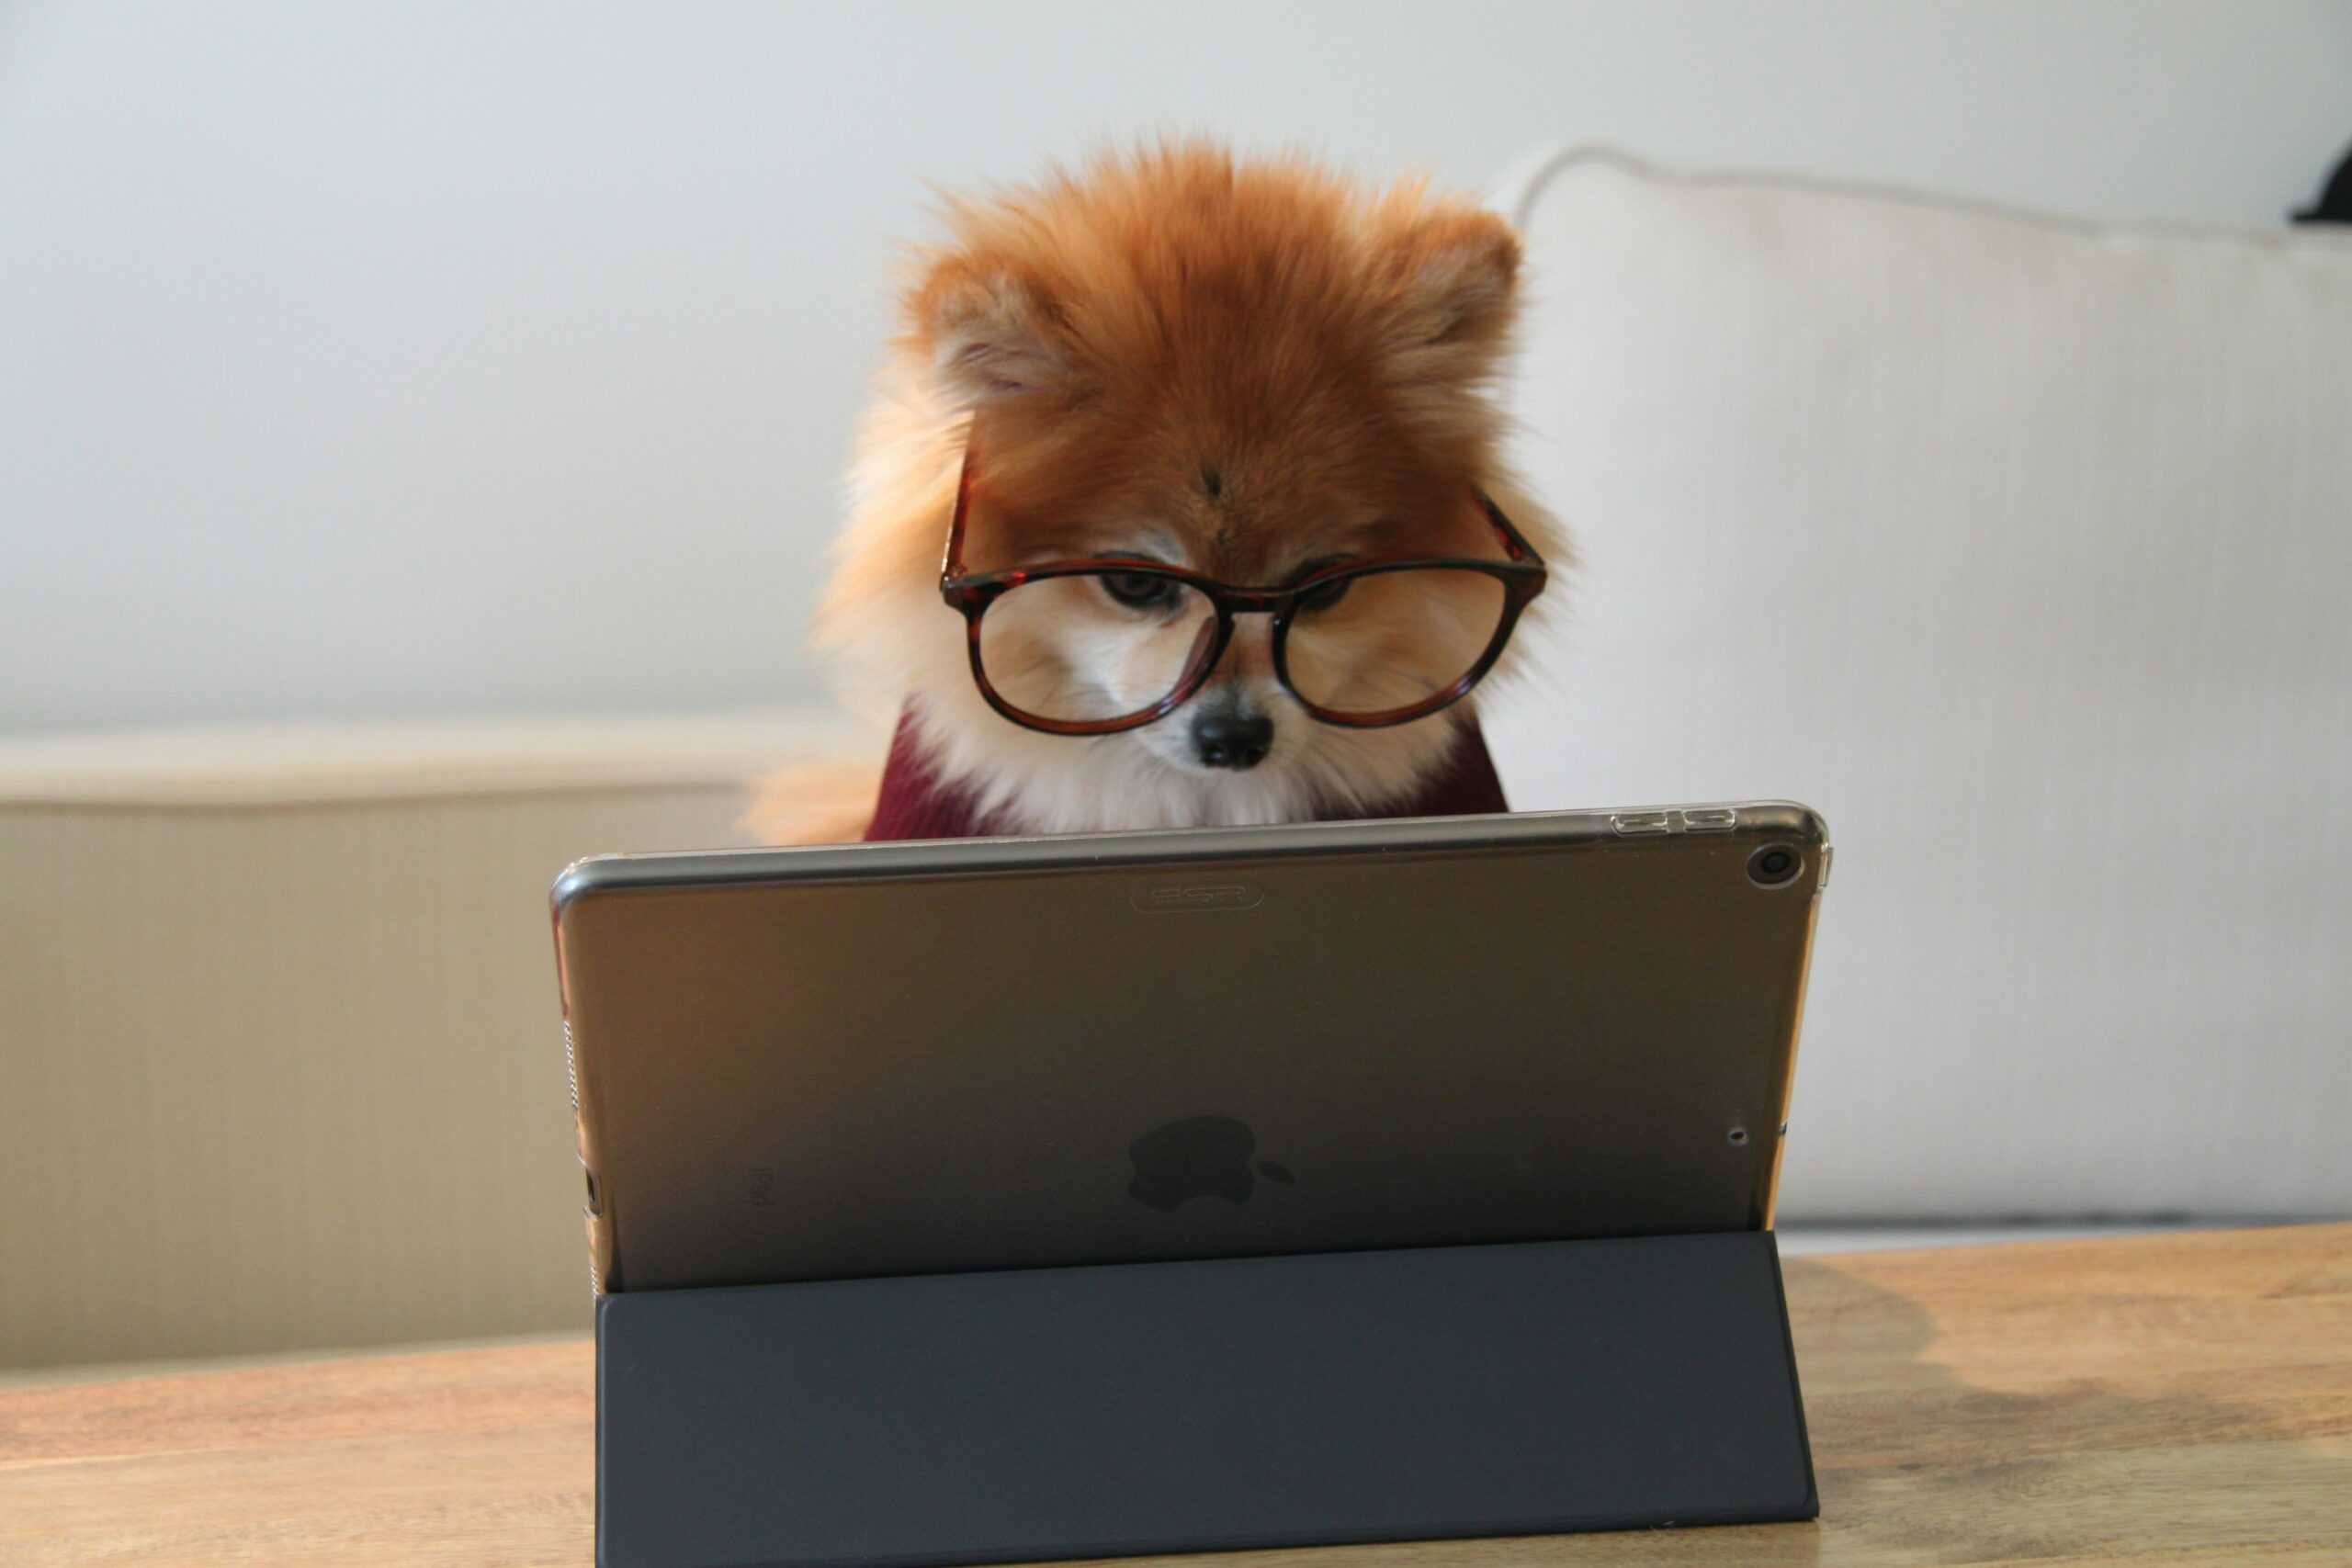 Dog with glasses on tablet